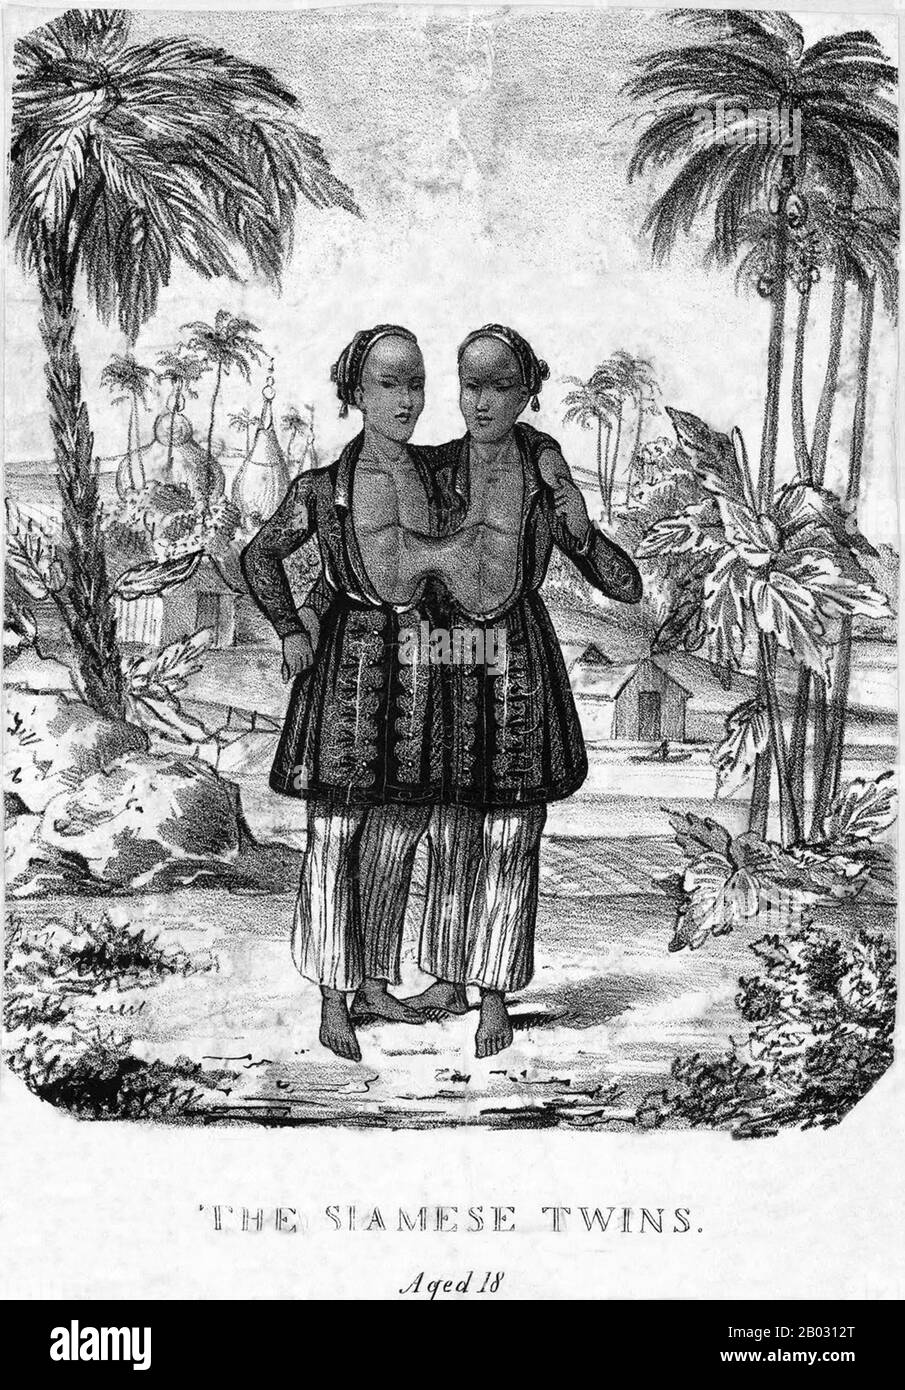 Chang and Eng Bunker (May 11, 1811 – January 17, 1874) were Thai-American conjoined twin brothers whose condition and birthplace became the basis for the term 'Siamese twins'.  The Bunker brothers were born on May 11, 1811, in the province of Samut Songkram, near Bangkok, in the Kingdom of Siam (today's Thailand). Their fisherman father was a Chinese Thai, while their mother was a Chinese Malaysian. Because of their Chinese heritage, they were known locally as the 'Chinese Twins'. The brothers were joined at the sternum by a small piece of cartilage, and though their livers were fused, they we Stock Photo